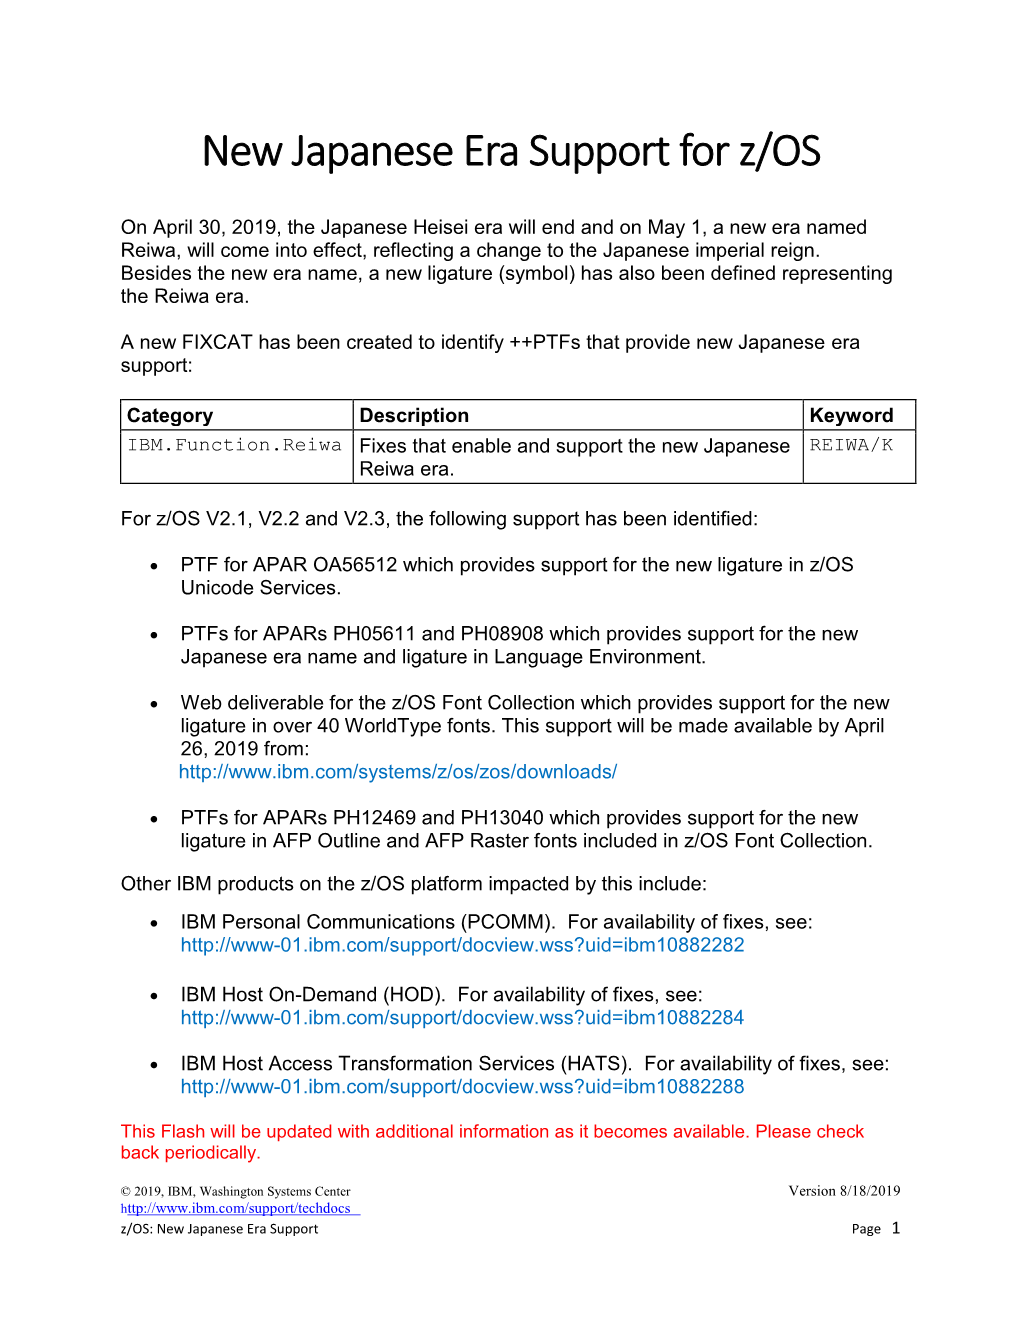 New Japanese Era Support for Z/OS